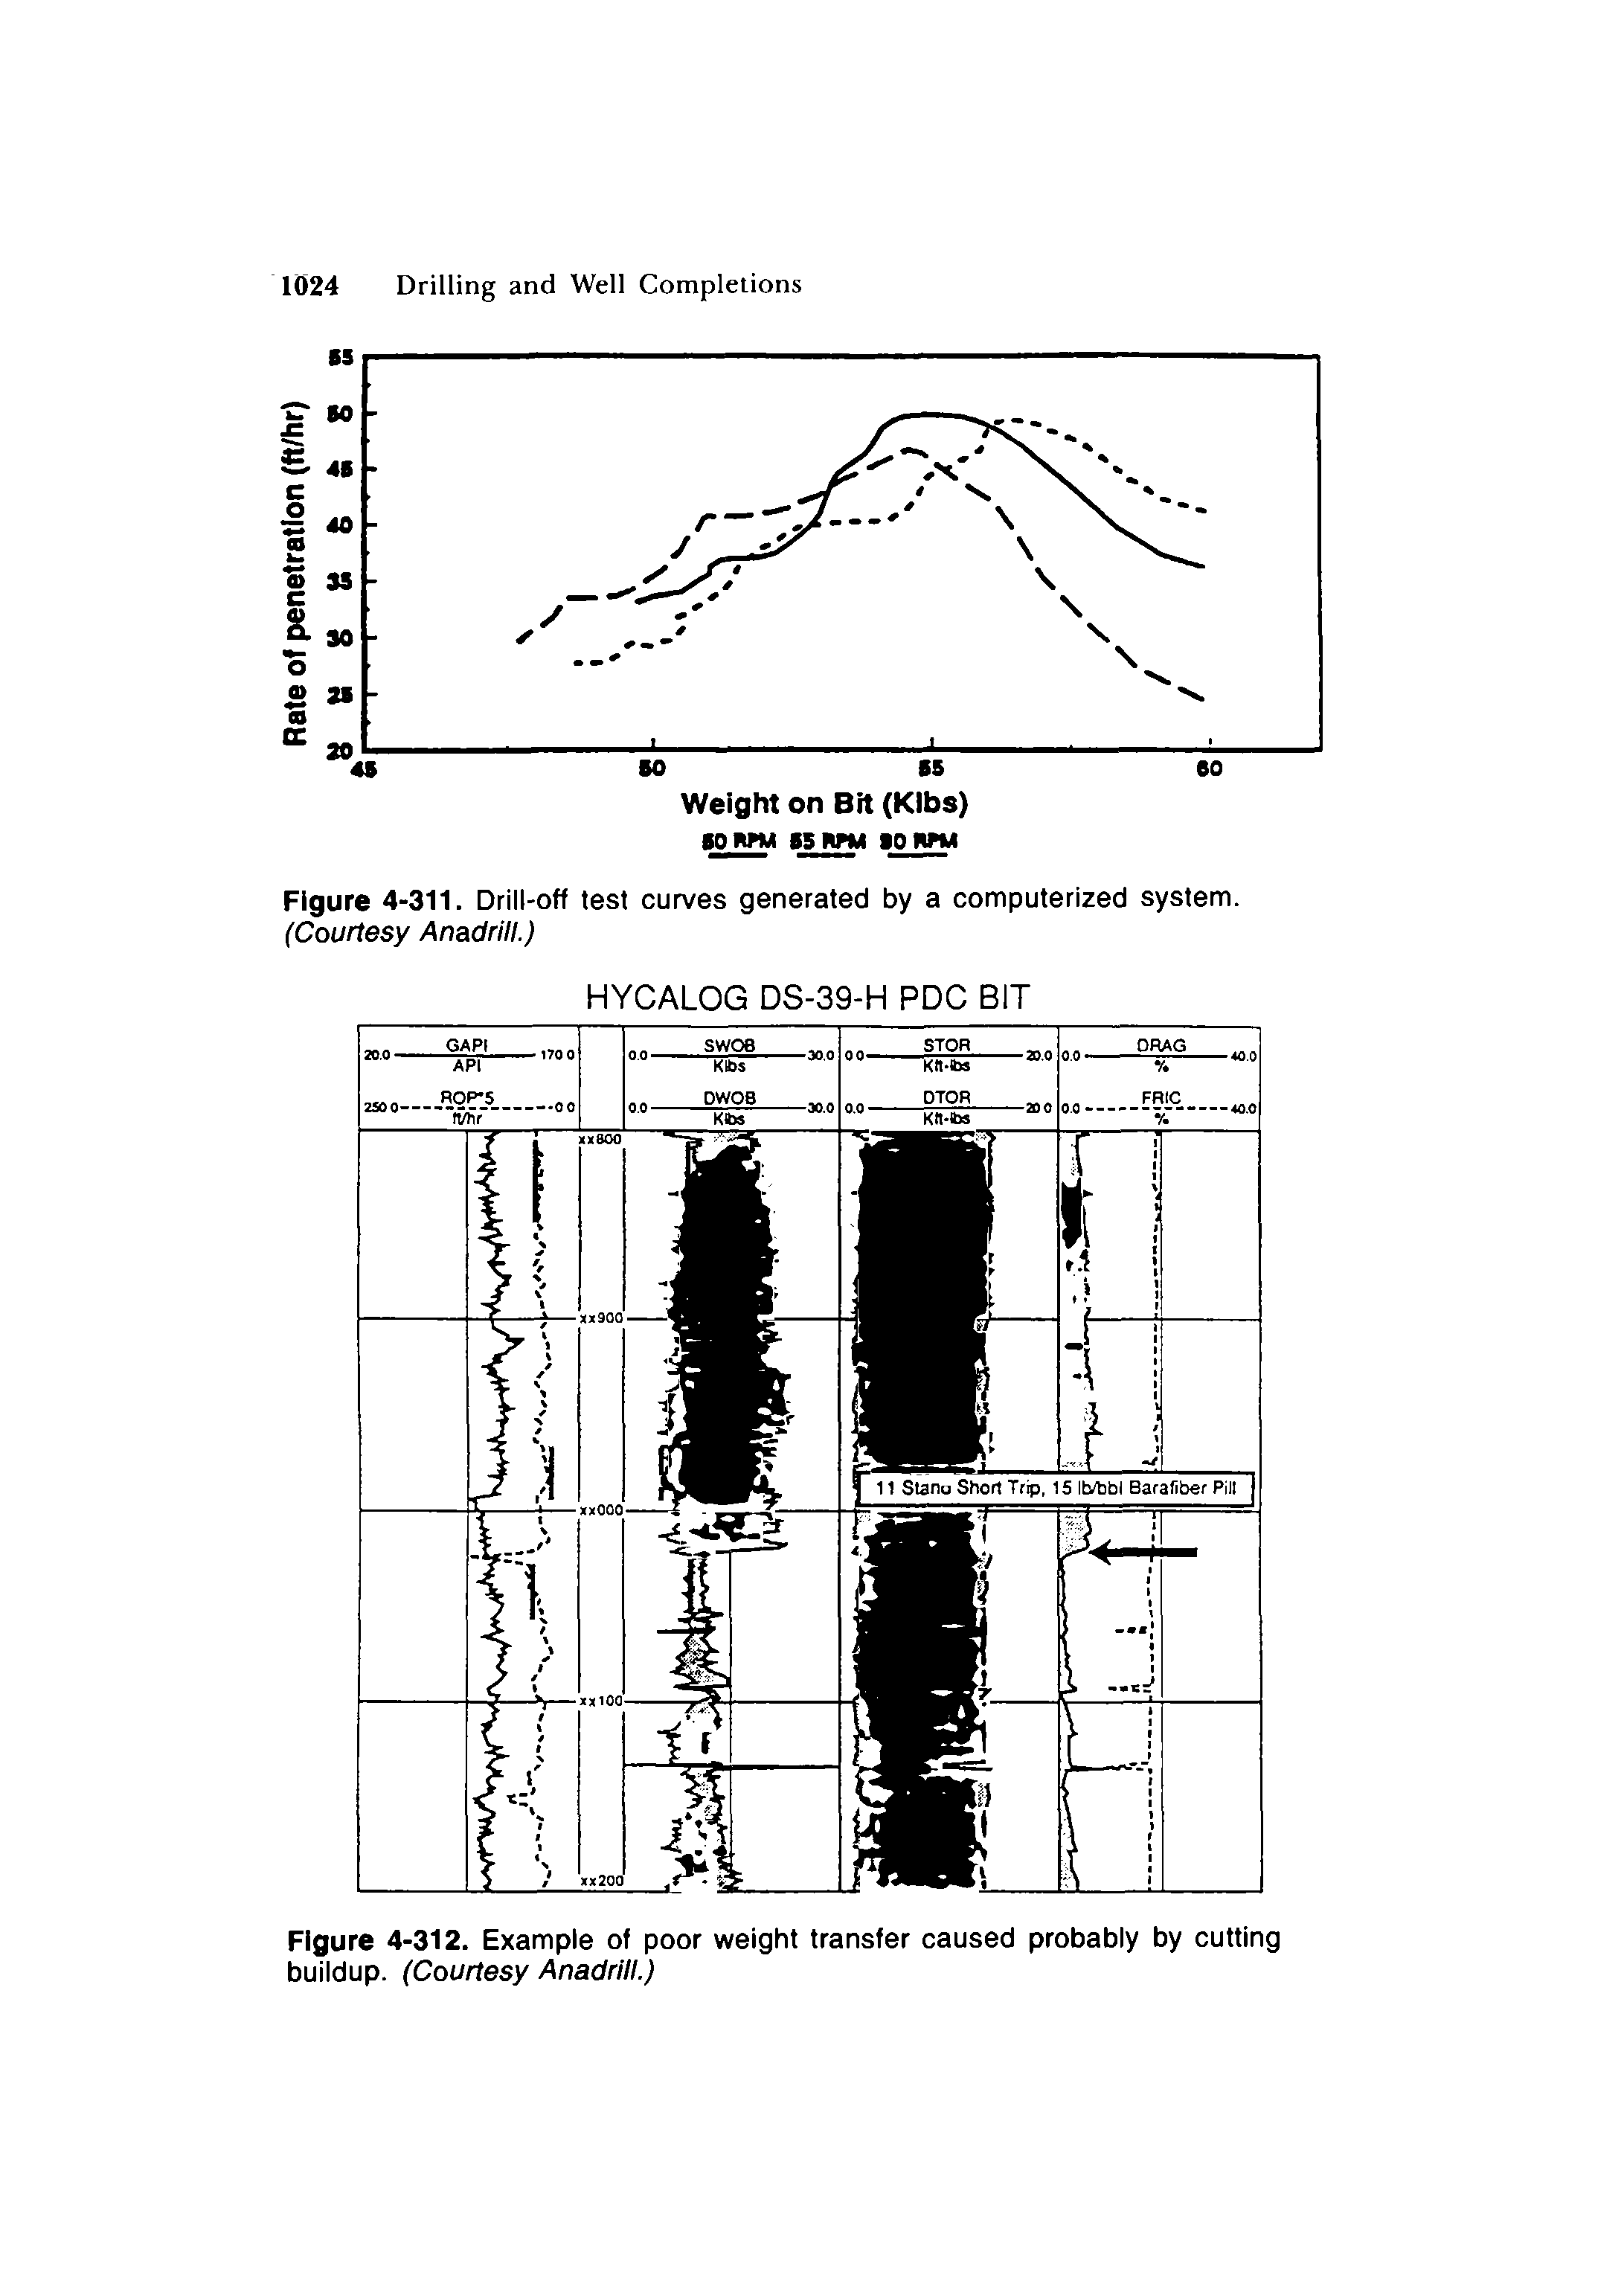 Figure 4-311. Drill-off test curves generated by a computerized system. (Courtesy Anadrill.)...